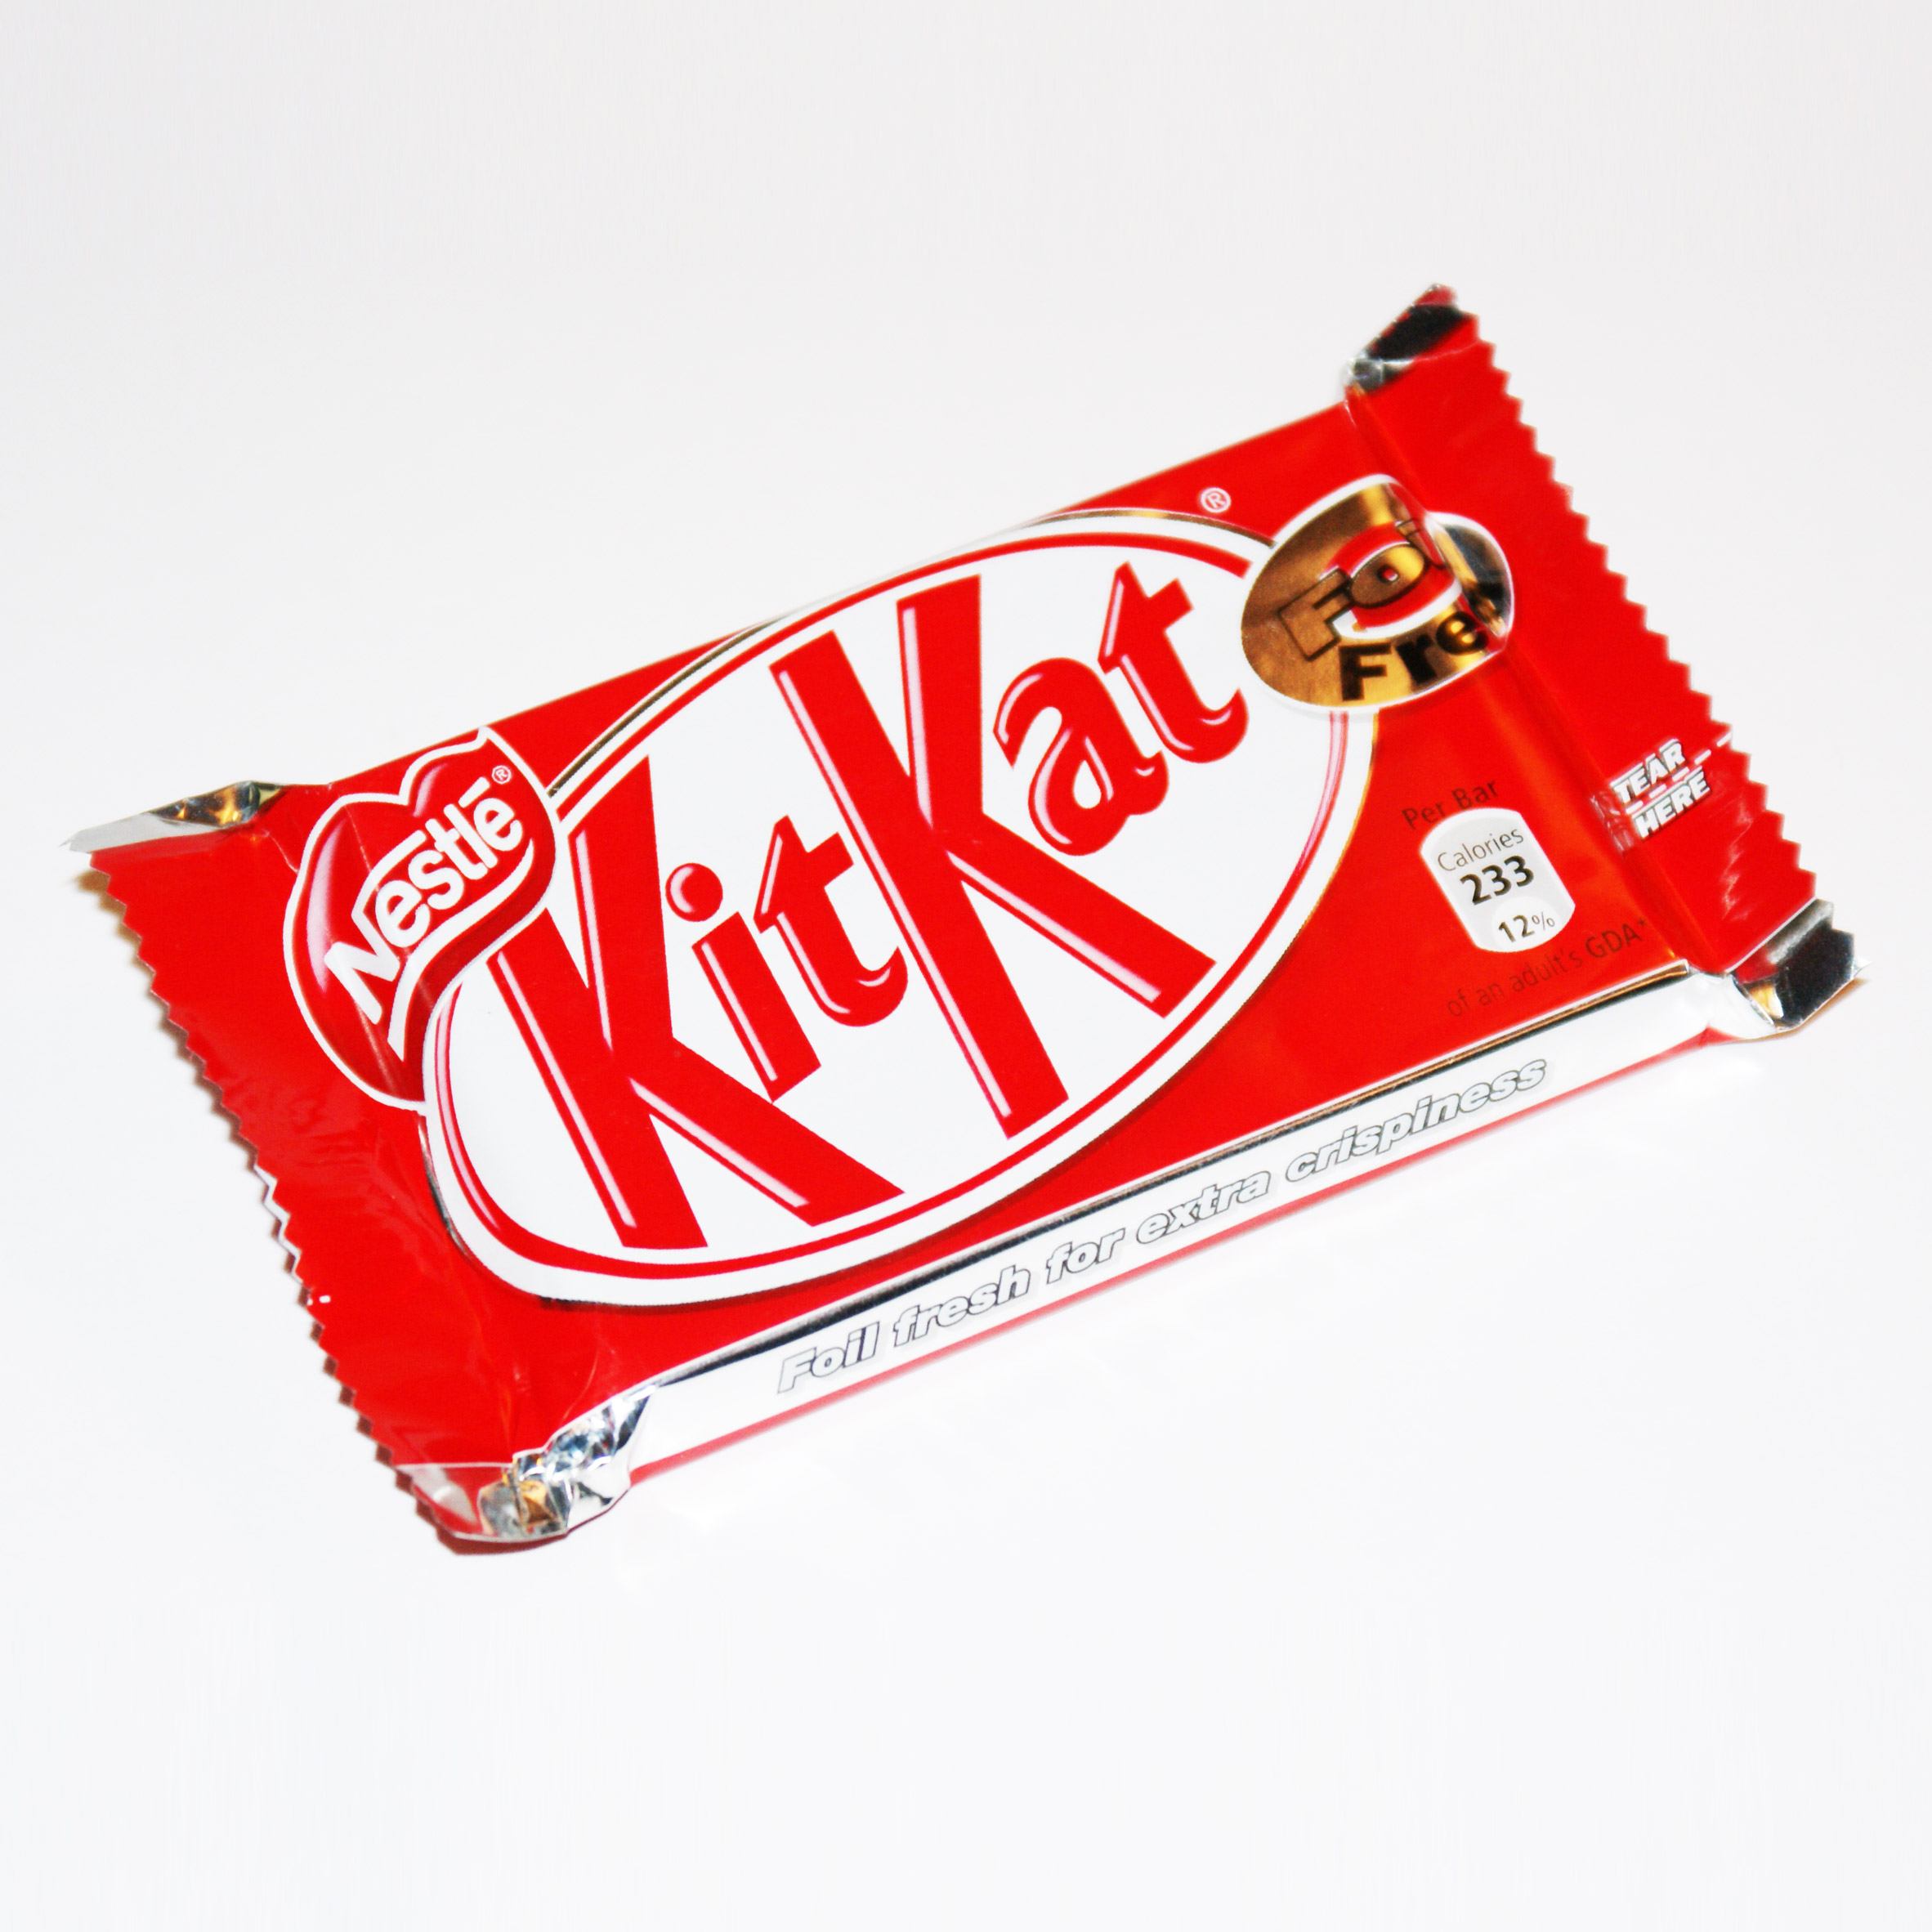 KitKat loses EU court appeal for four-finger chocolate bar trade mark